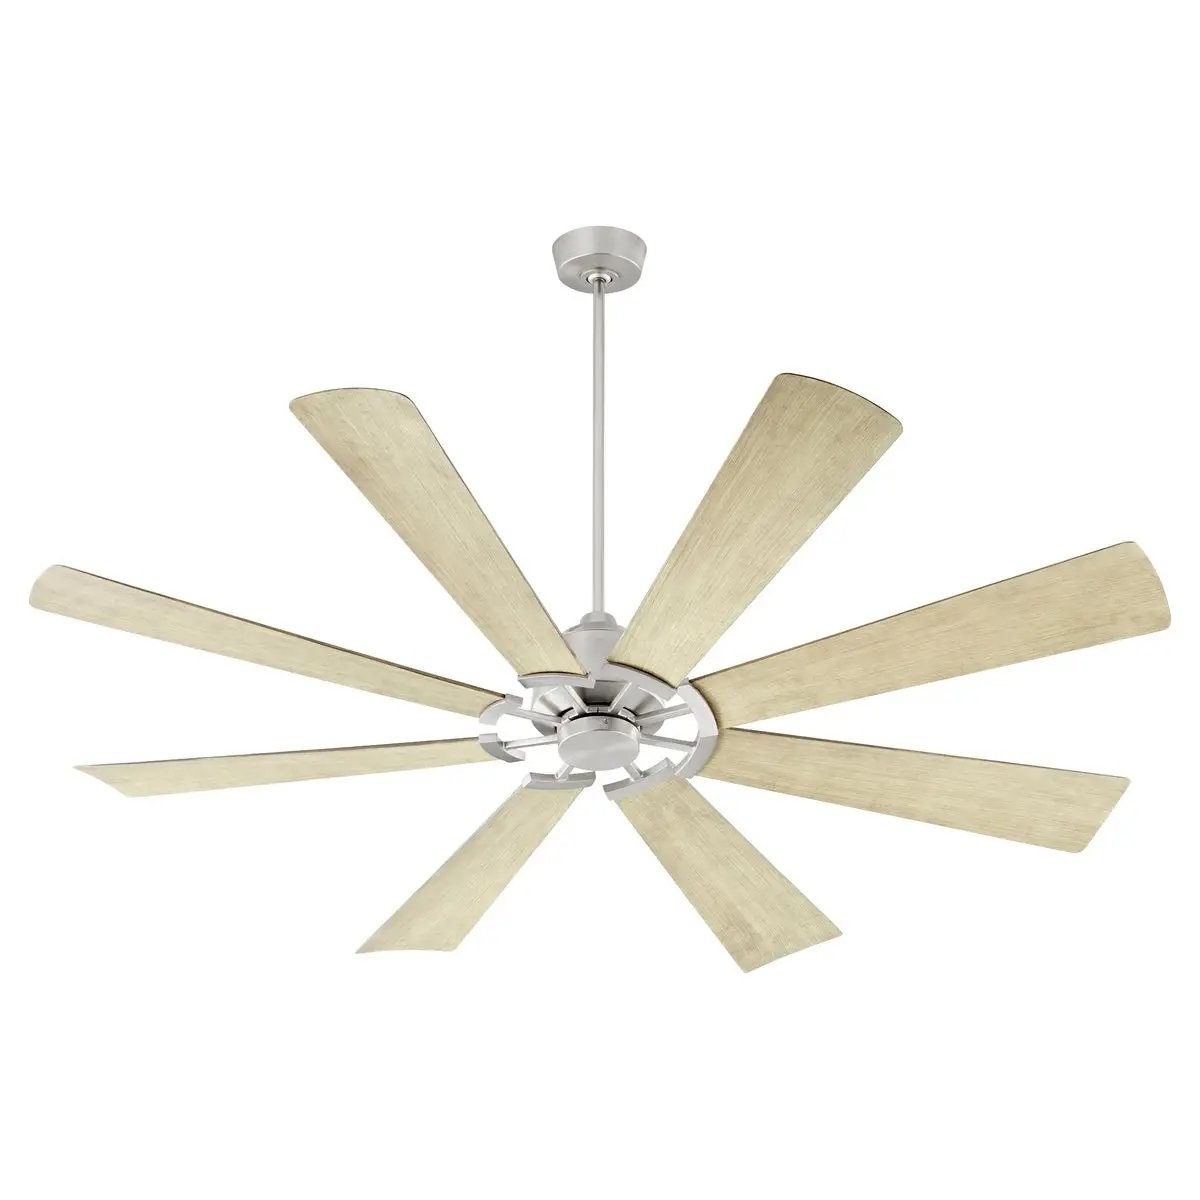 A modern ceiling fan with 8 wood blades and a light fixture, perfect for mid-sized and larger spaces. Damp listed for outdoor covered areas. Elevate your space with this Quorum International Modern Ceiling Fan.